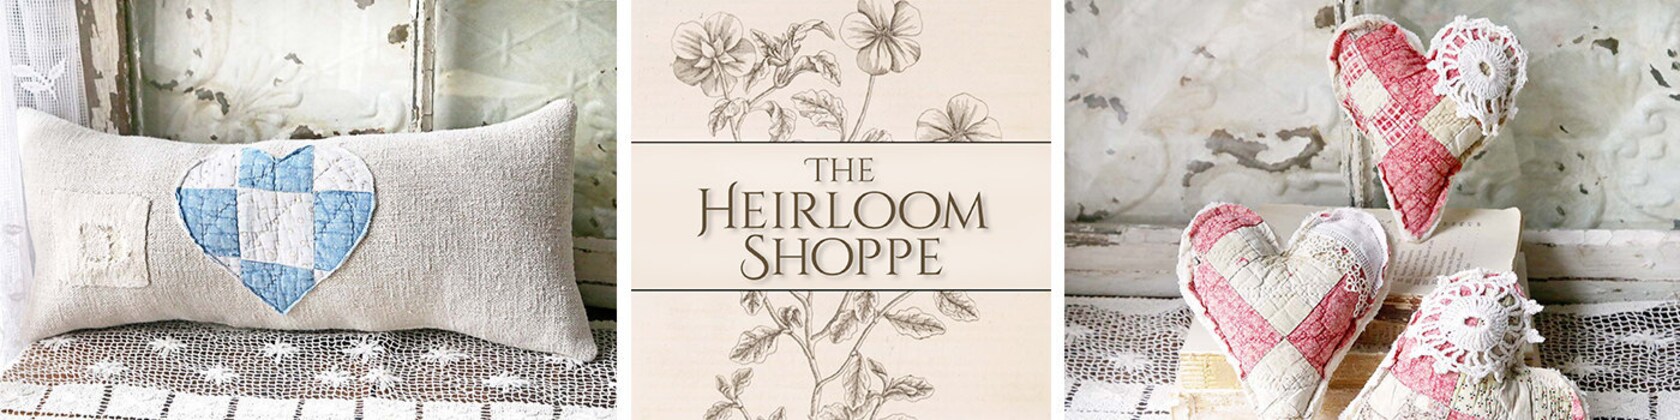 TheHeirloomShoppe 